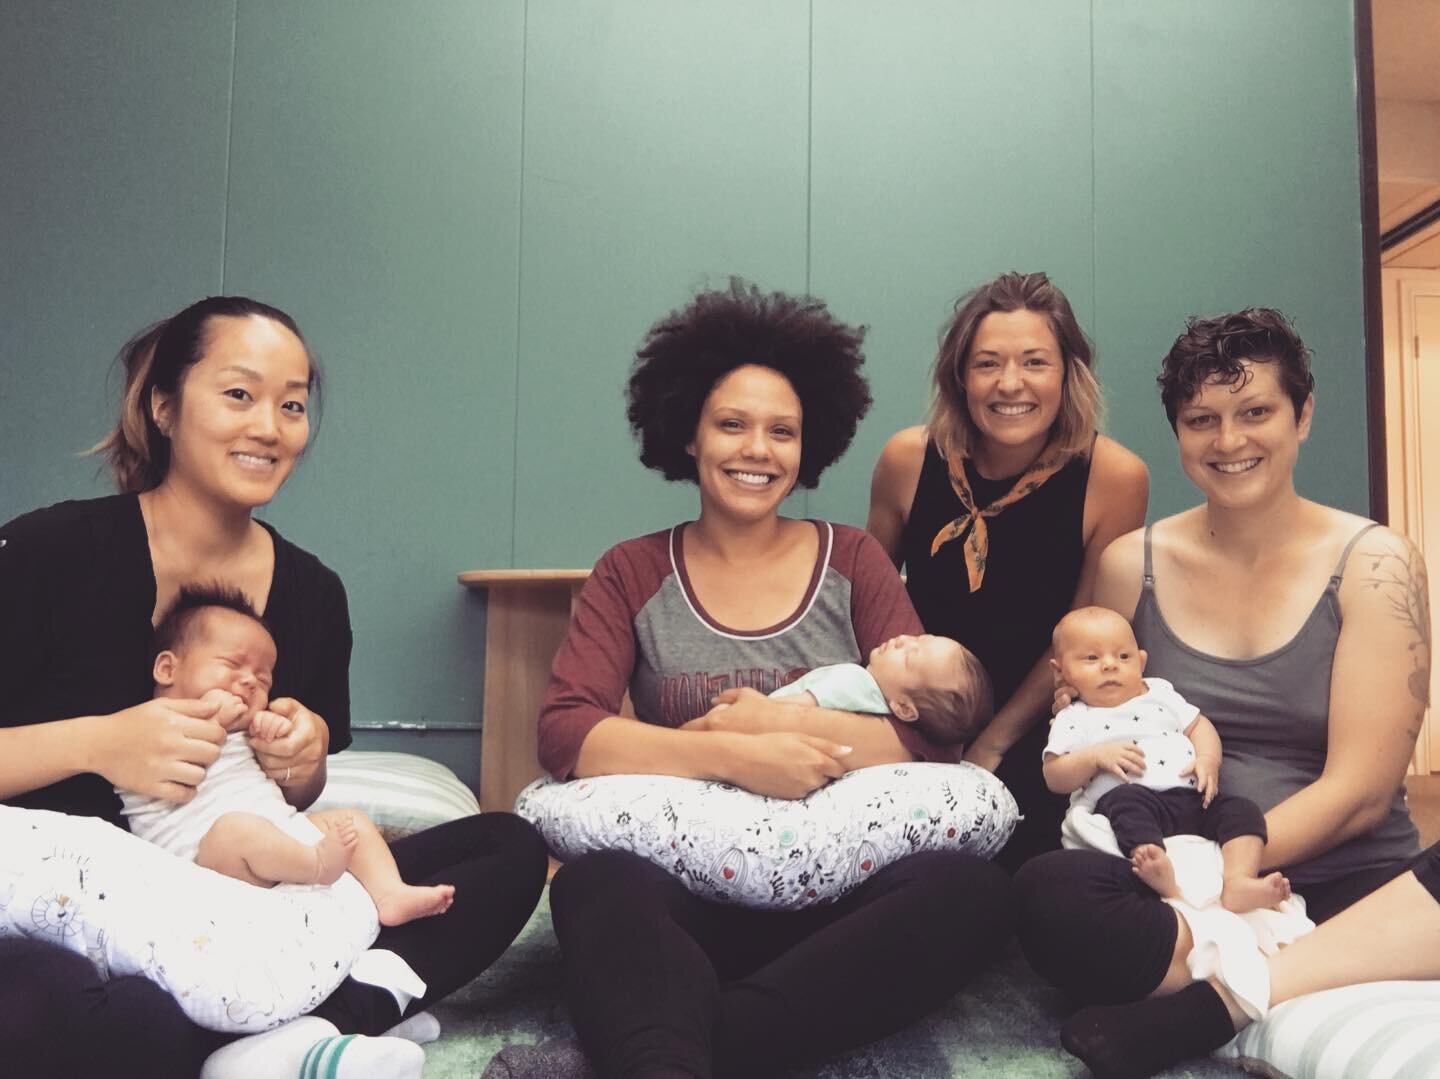 Loving all the baby time at our Playlab Breastfeeding Support Group every Tuesday! ❤️❤️❤️ Join us next week for some snacks and a chance to meet other wonderful Mom&rsquo;s ✨✨✨ @goplaylab #support #mamma #breastfeeding #lactationconsultant #strongert